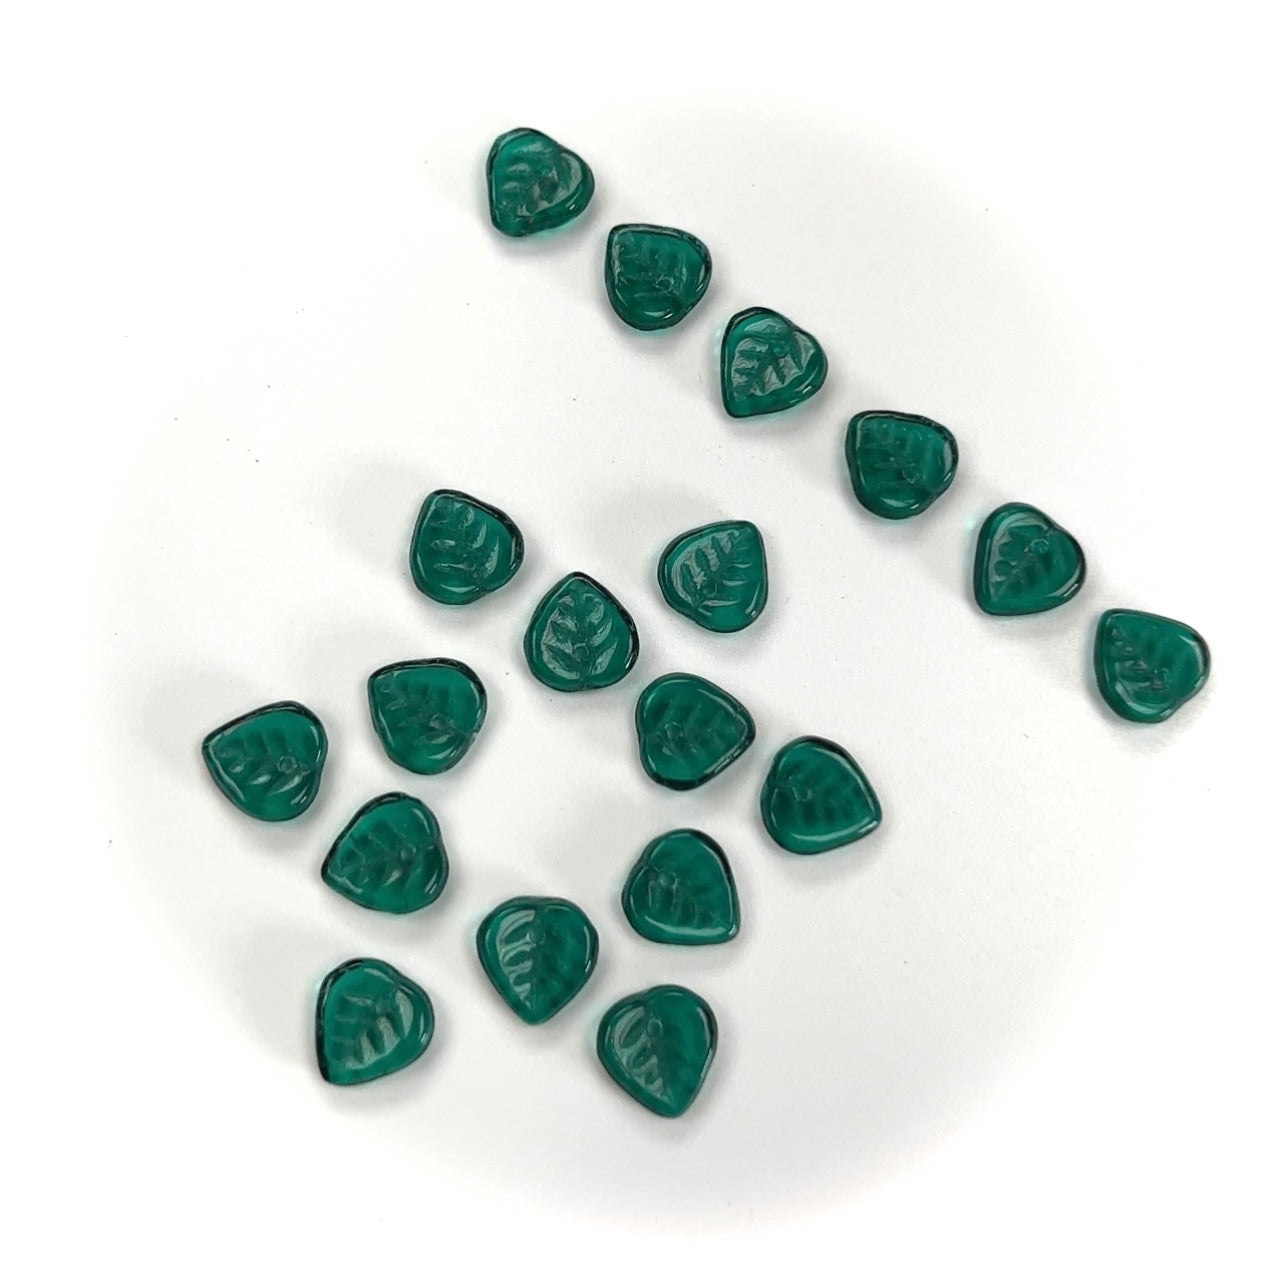 Czech Glass Druk Pendant Beads in size 9mm, top drilled Leaf, Emerald green color, 50pcs, J052